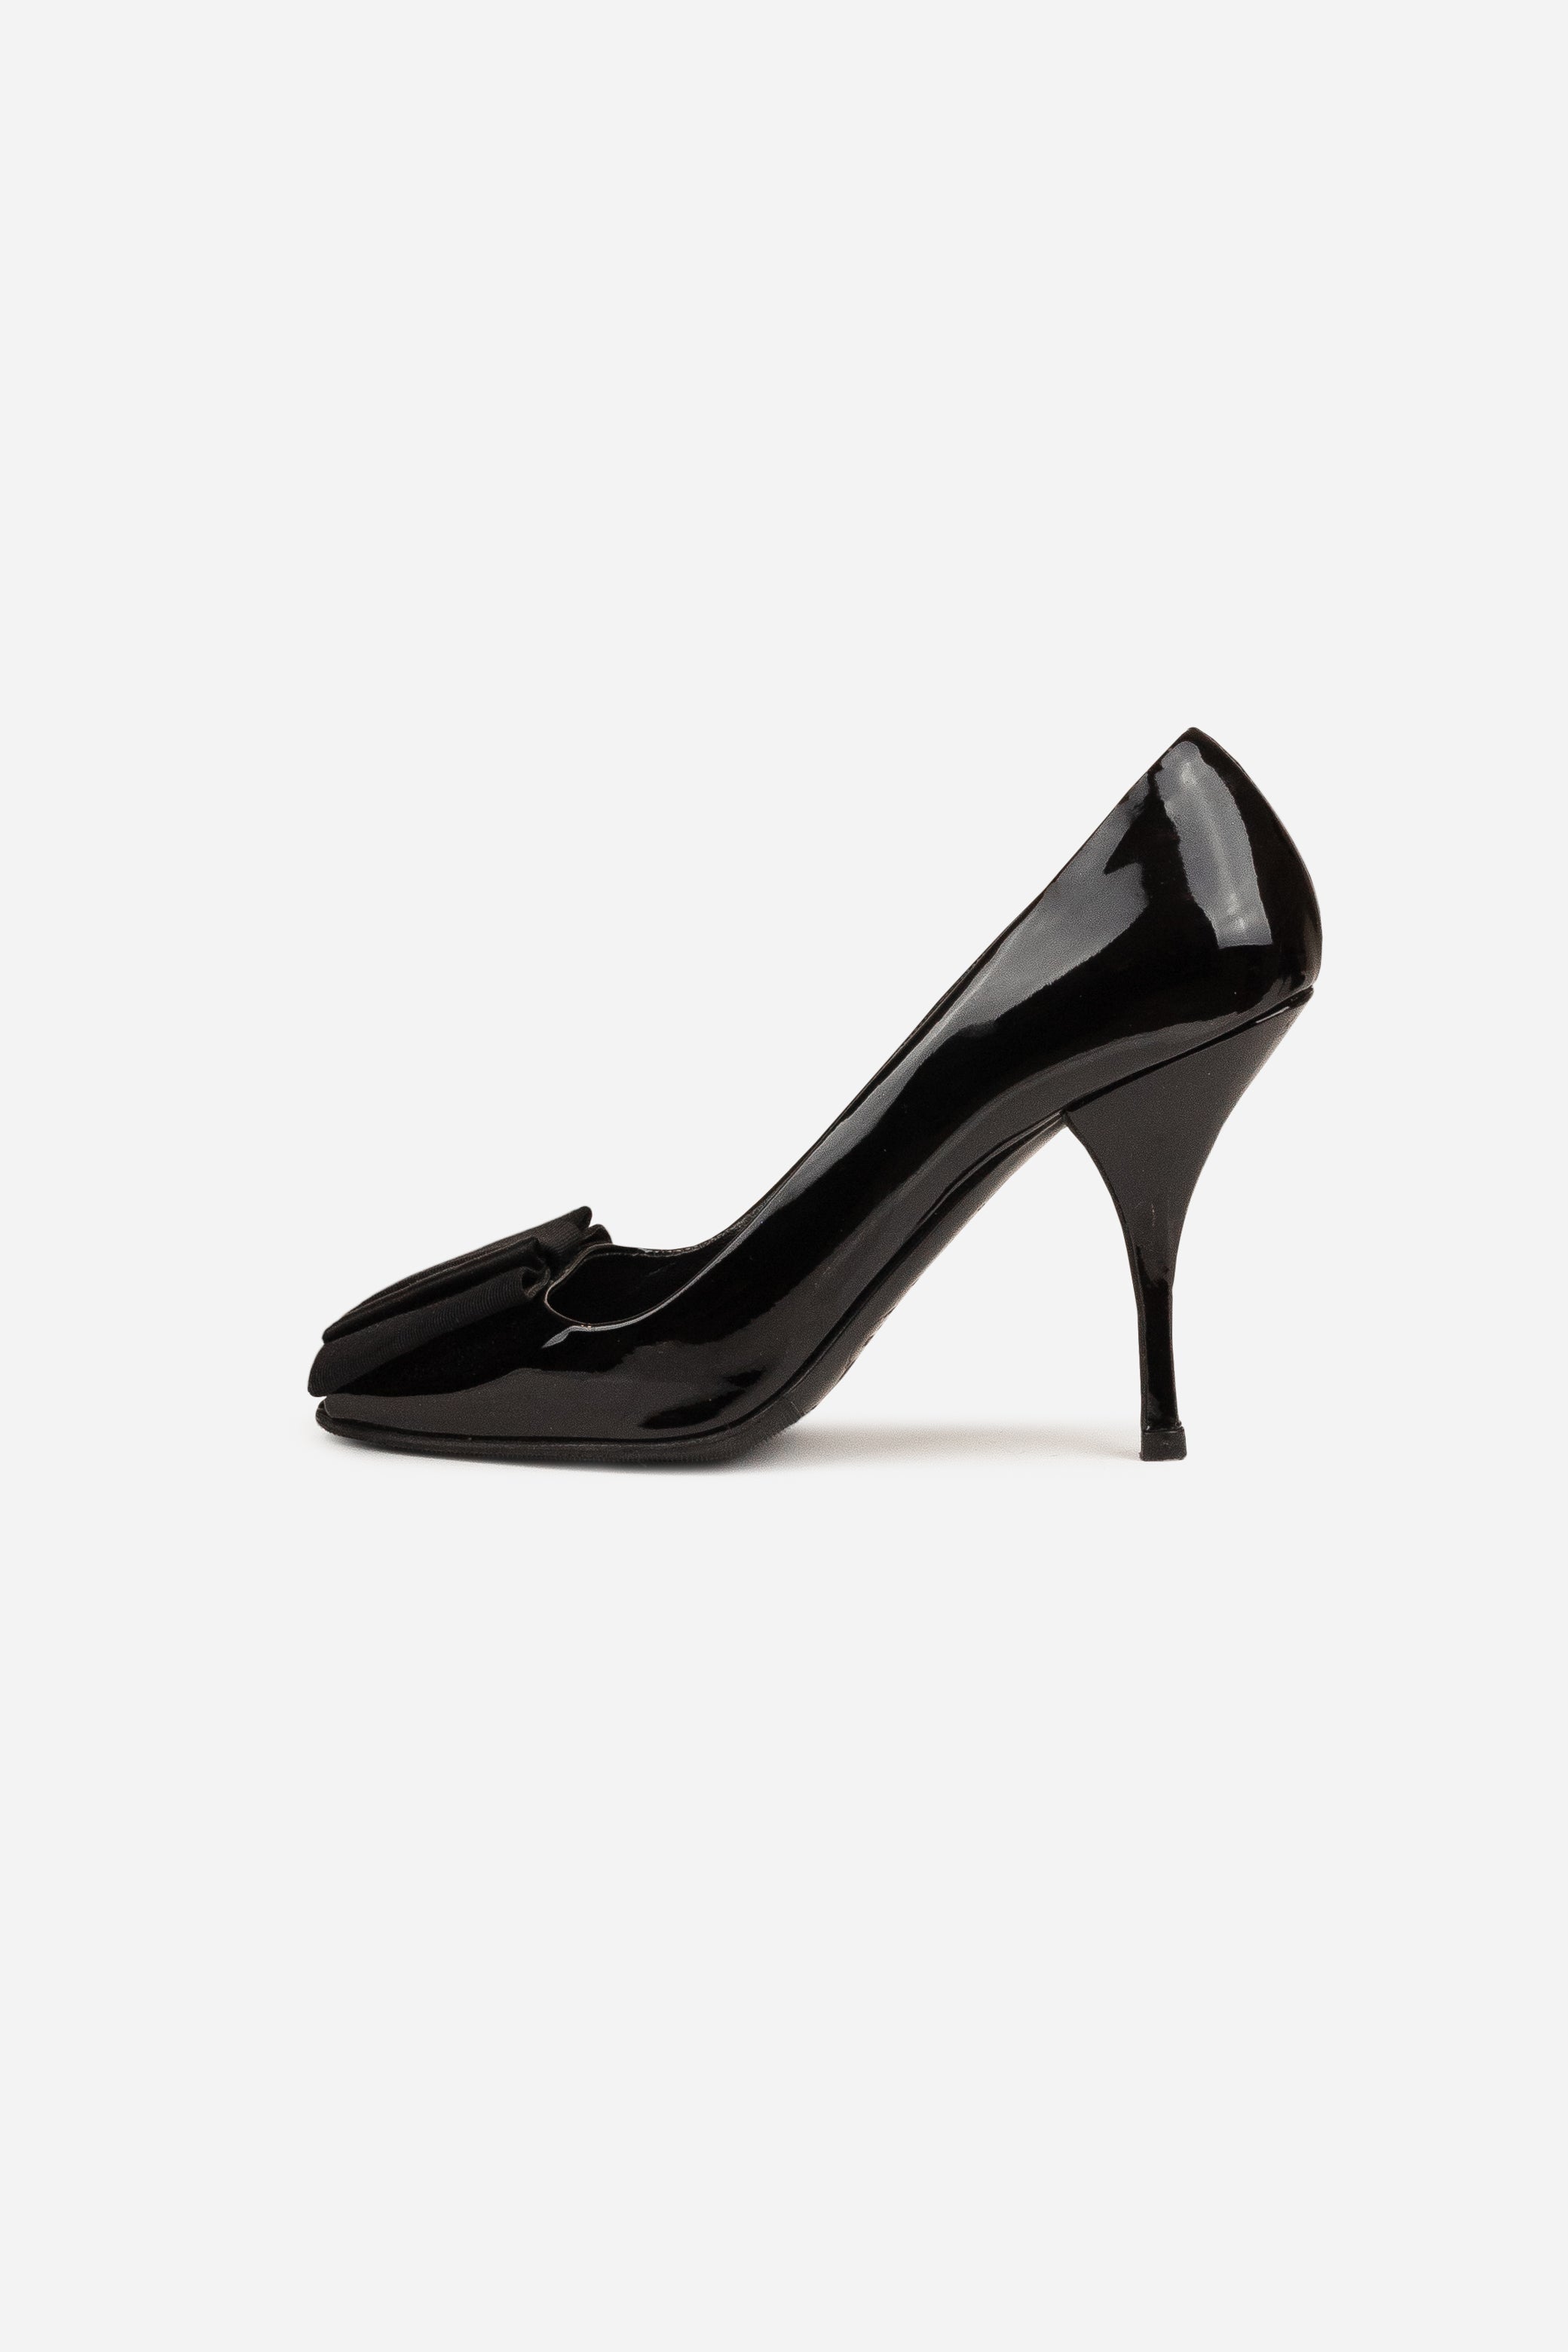 Black Patent Leather Bow Detailed Pumps - So Over It Luxury Consignment